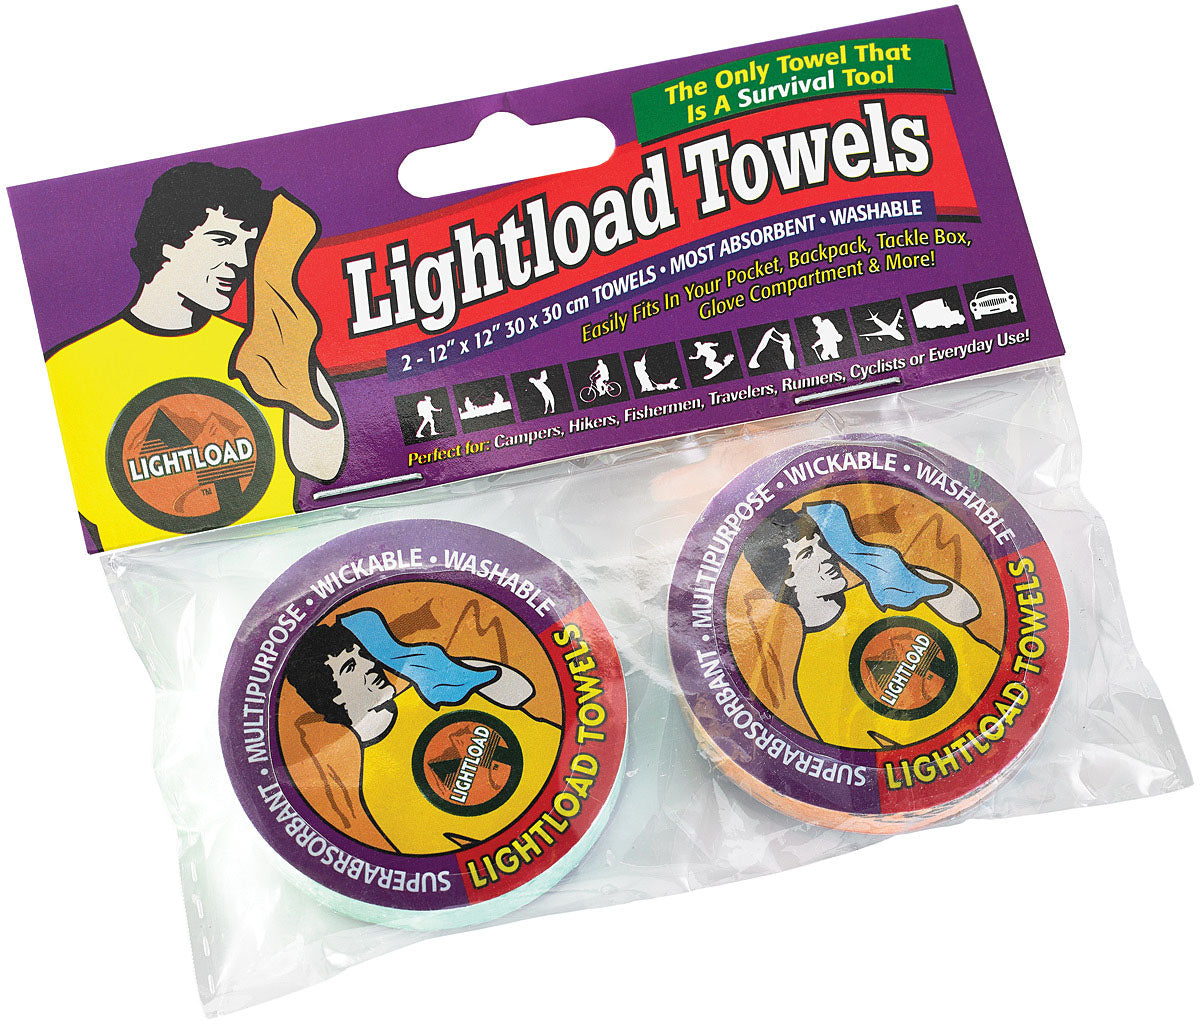 LIGHTLOAD TOWEL LIGHTLOAD EZ CARRY BEACH TOWEL - PrepTakers - Survival and Outdoor Information & Products